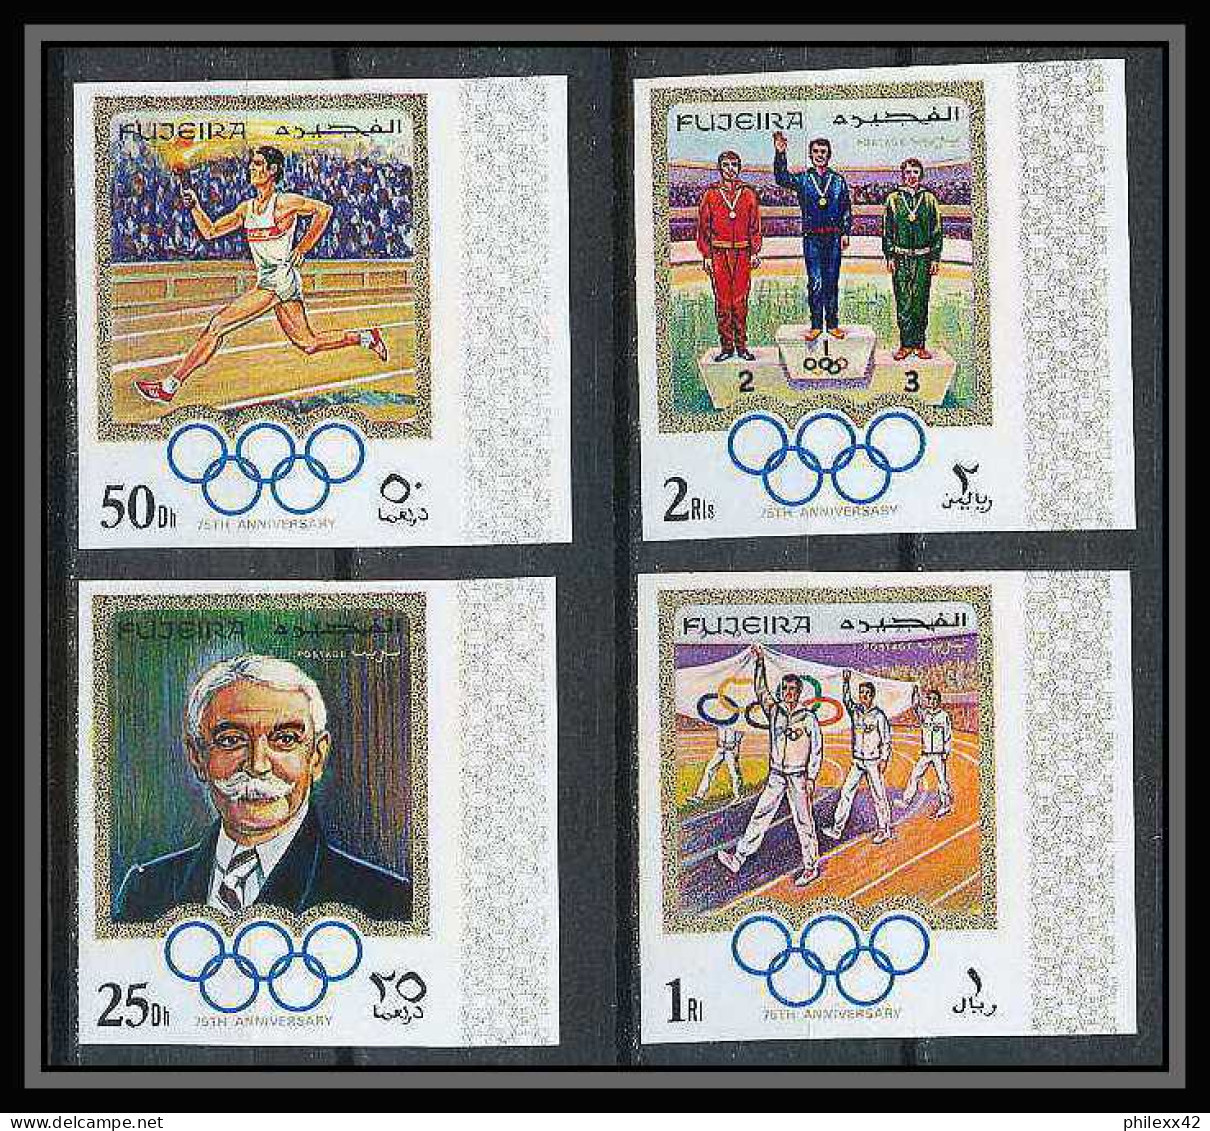 048a - Fujeira - MNH ** Mi N° 529 / 532 B Jeux Olympiques (olympic Games) Non Dentelé (Imperf) Munchen 72 - Sommer 1972: München